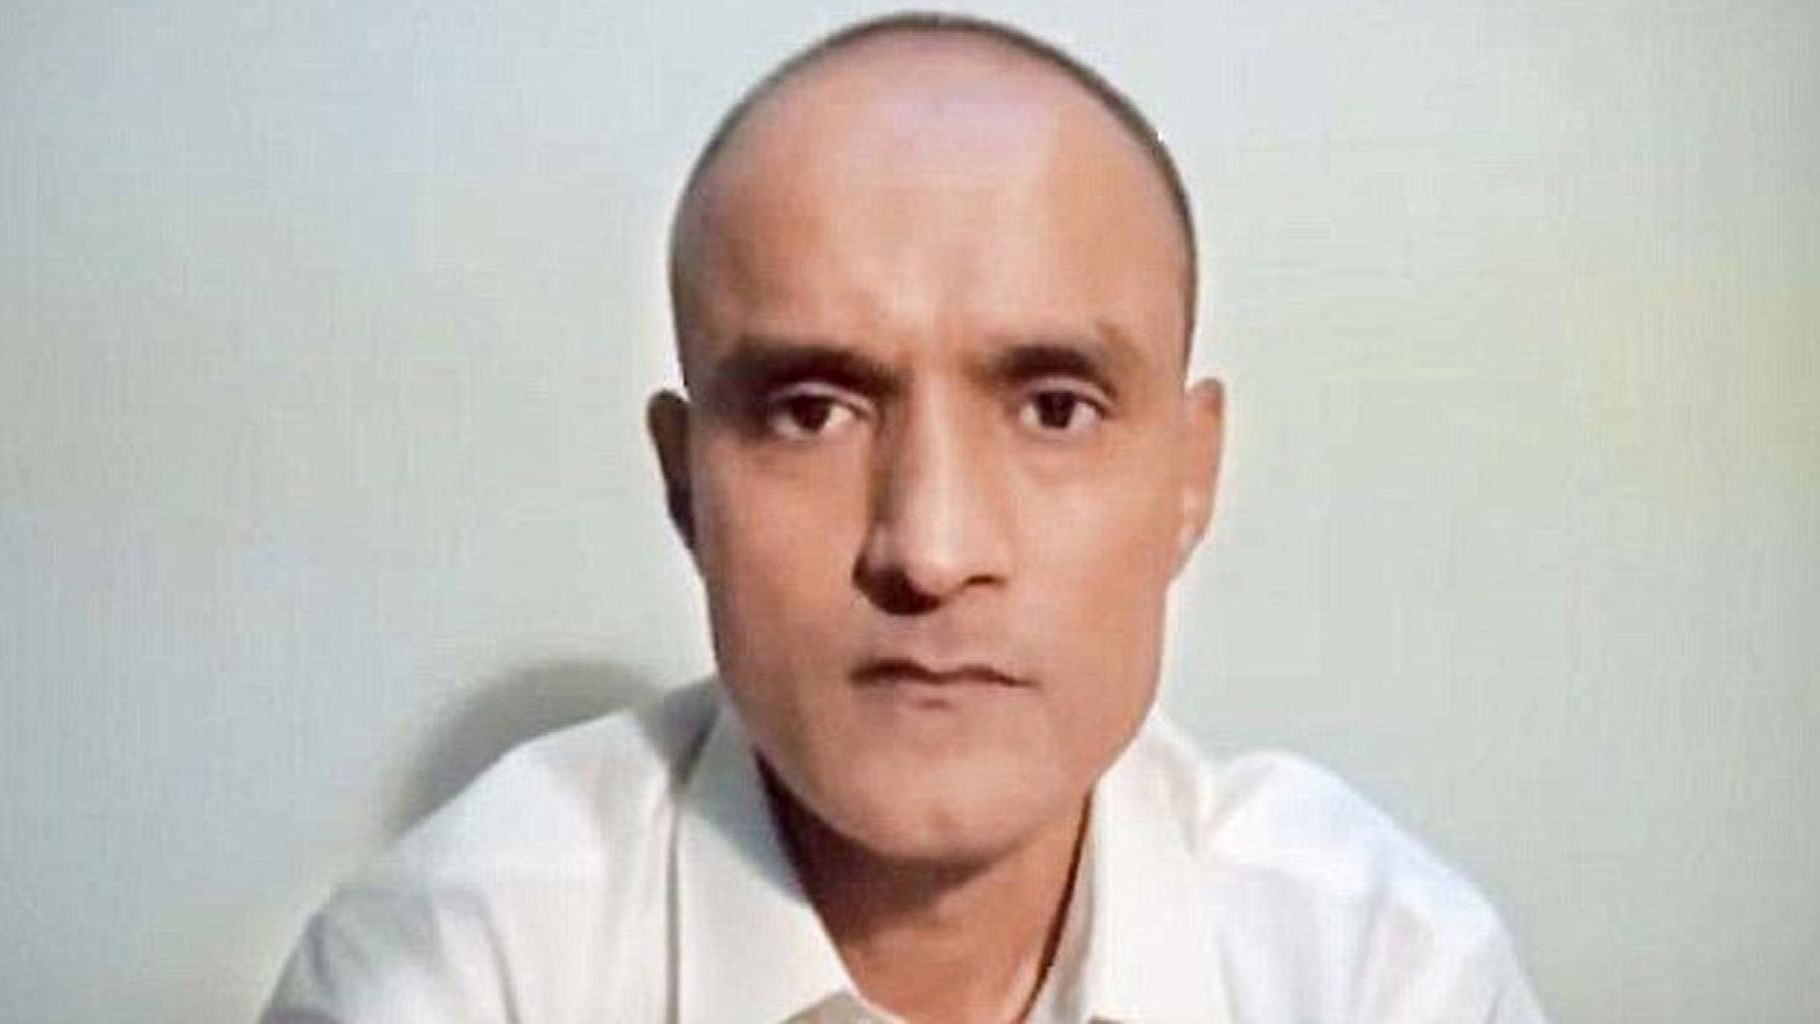 The death sentence to Kulbhushan Jadhav was confirmed by Pakistani army chief Gen Qamar Javed Bajwa after the Field General Court Martial (FGCM) found him guilty of all the charges. (Photo Courtesy: YouTube/Dawn News)